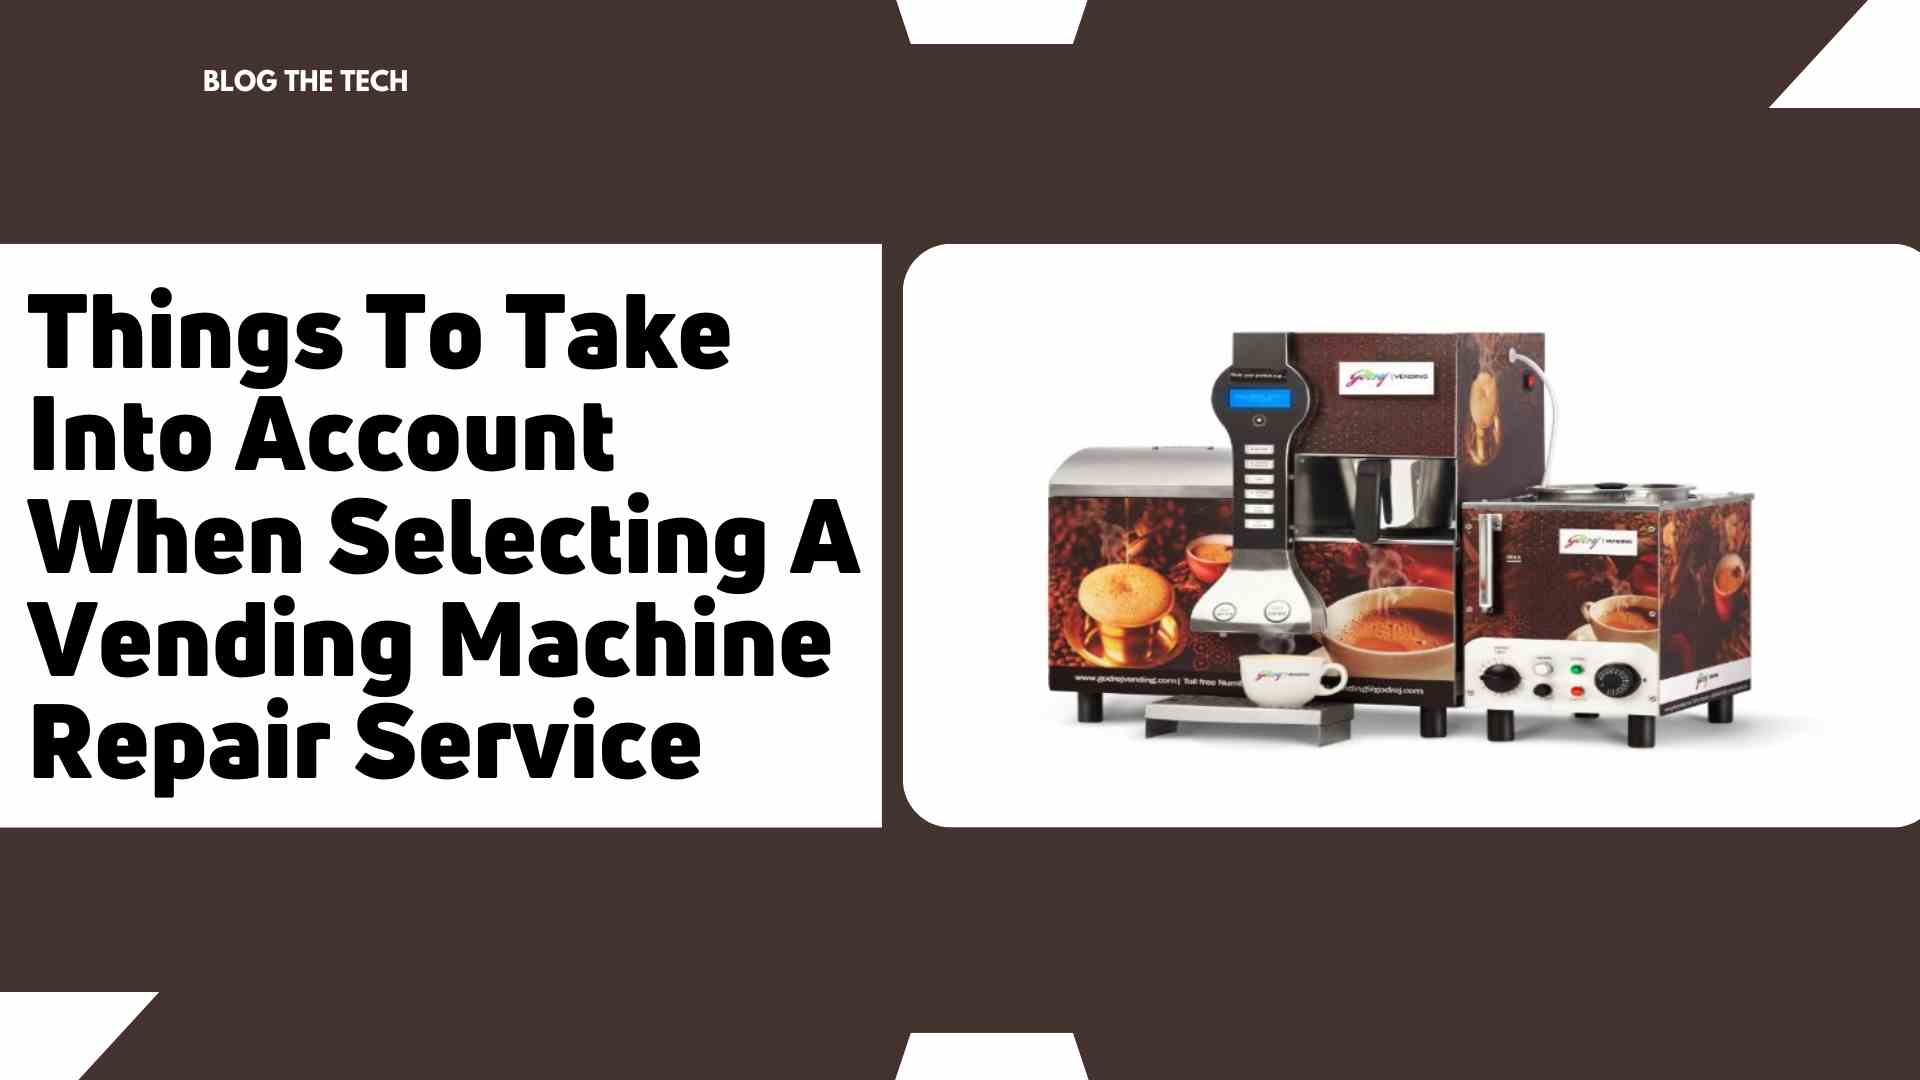 Things To Take Into Account When Selecting A Vending Machine Repair Service